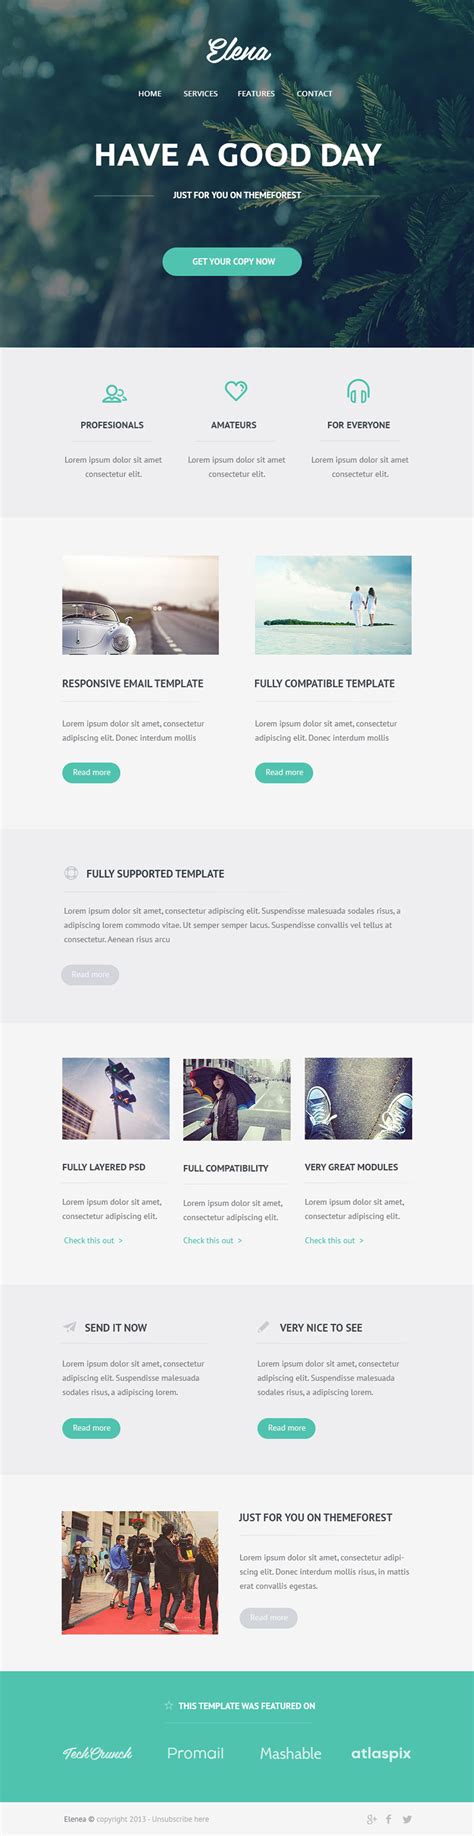 latest  web page templates psd visual interaction design